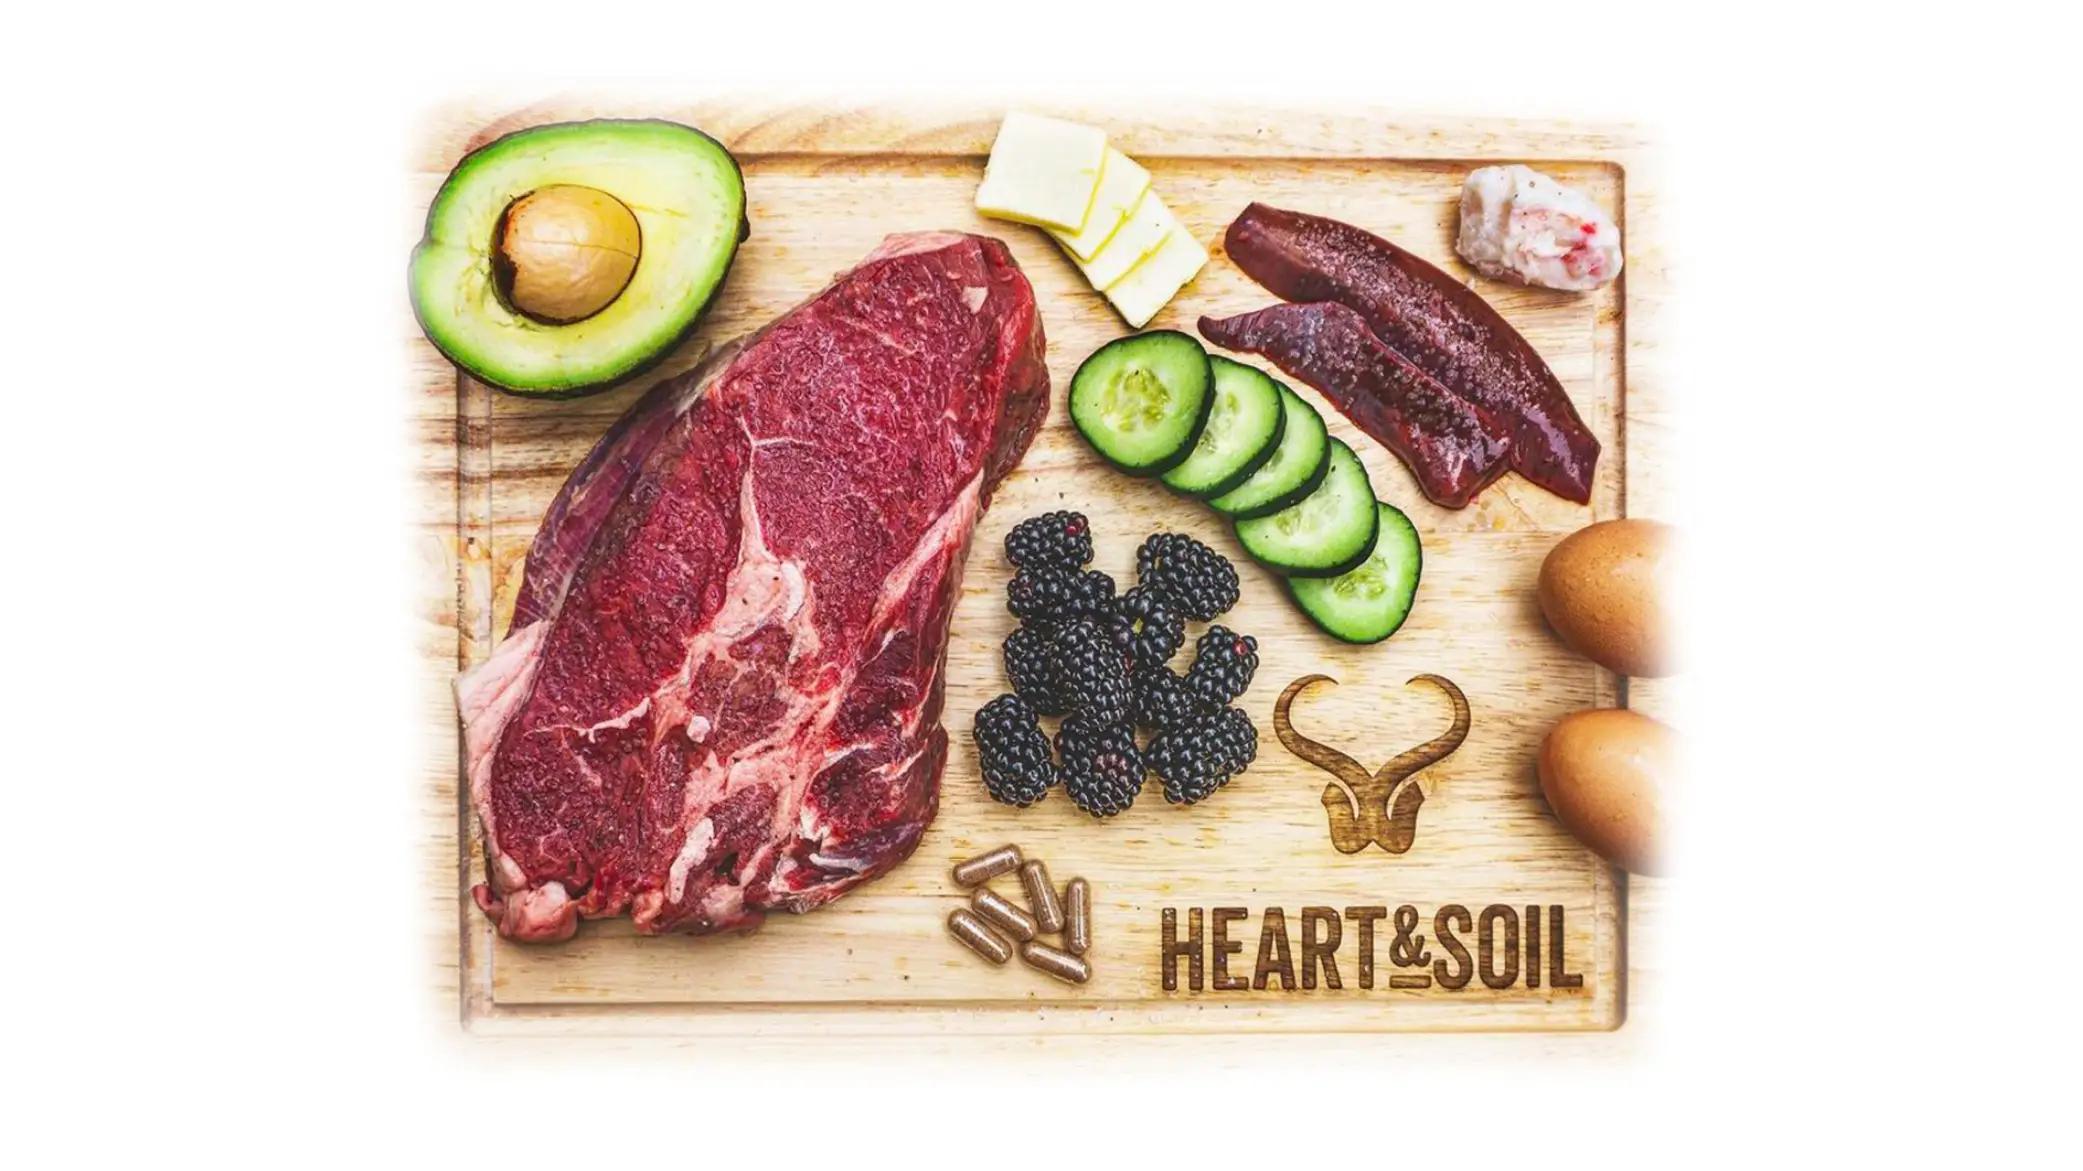 Heart and soil supplements: BusinessHAB.com